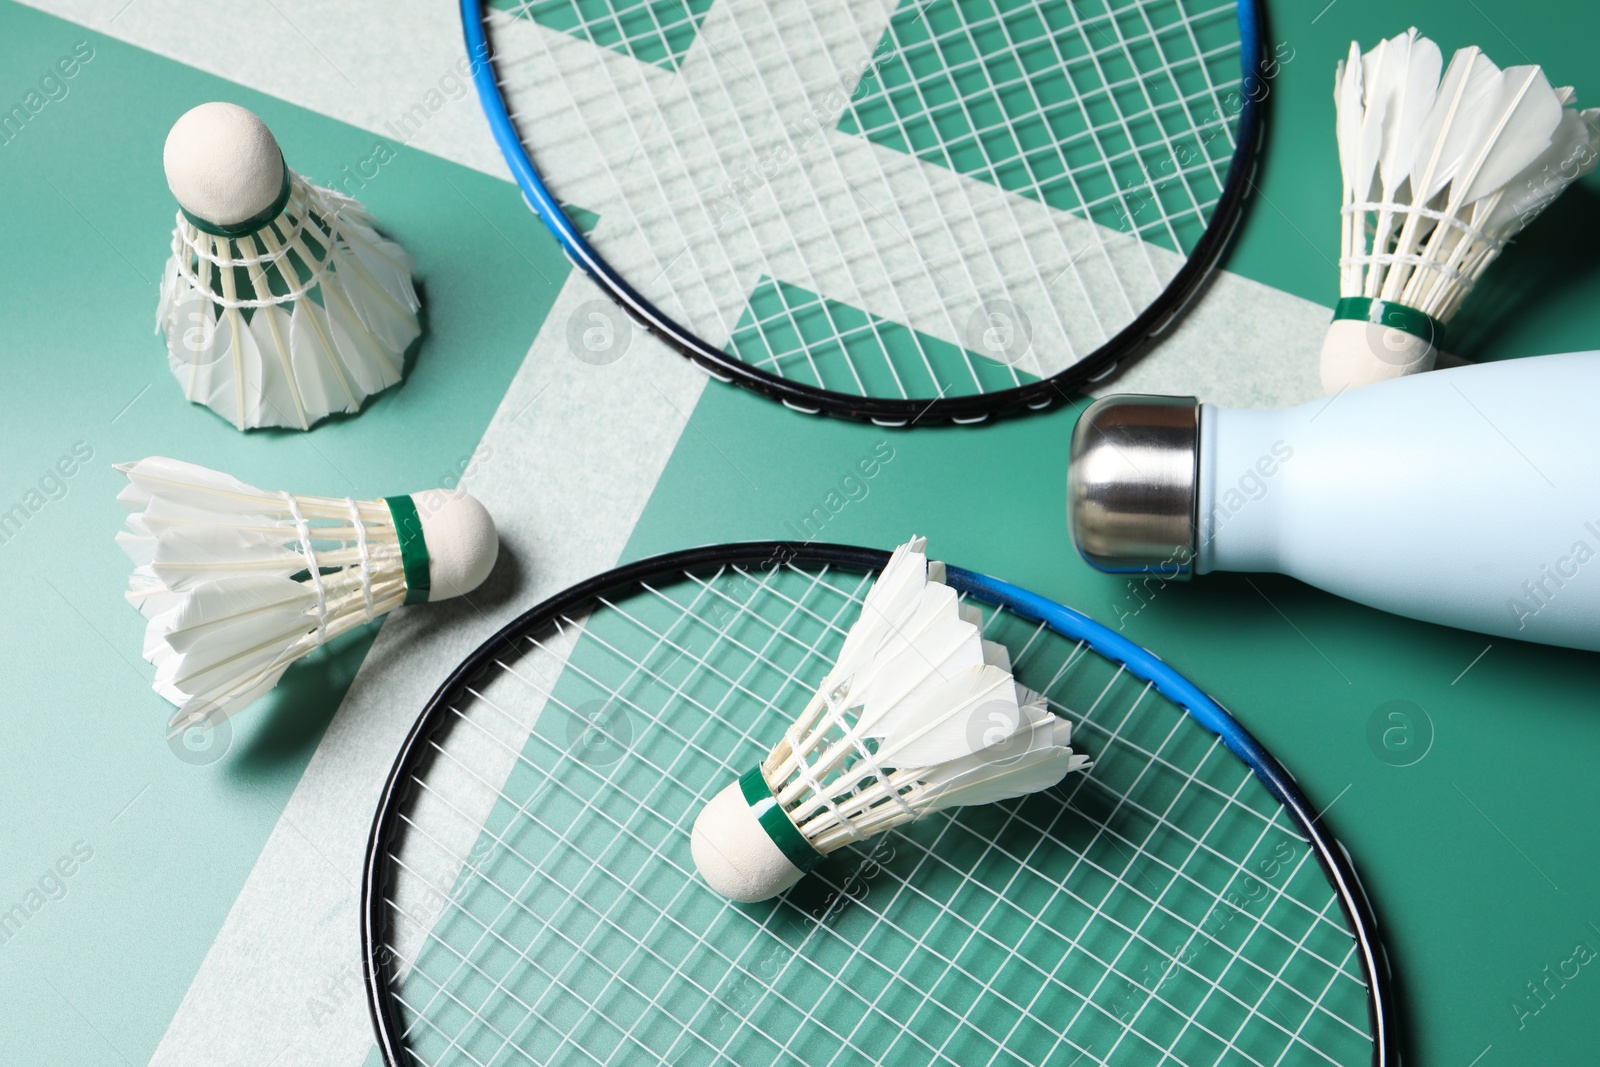 Photo of Feather badminton shuttlecocks, rackets and bottle on court, above view